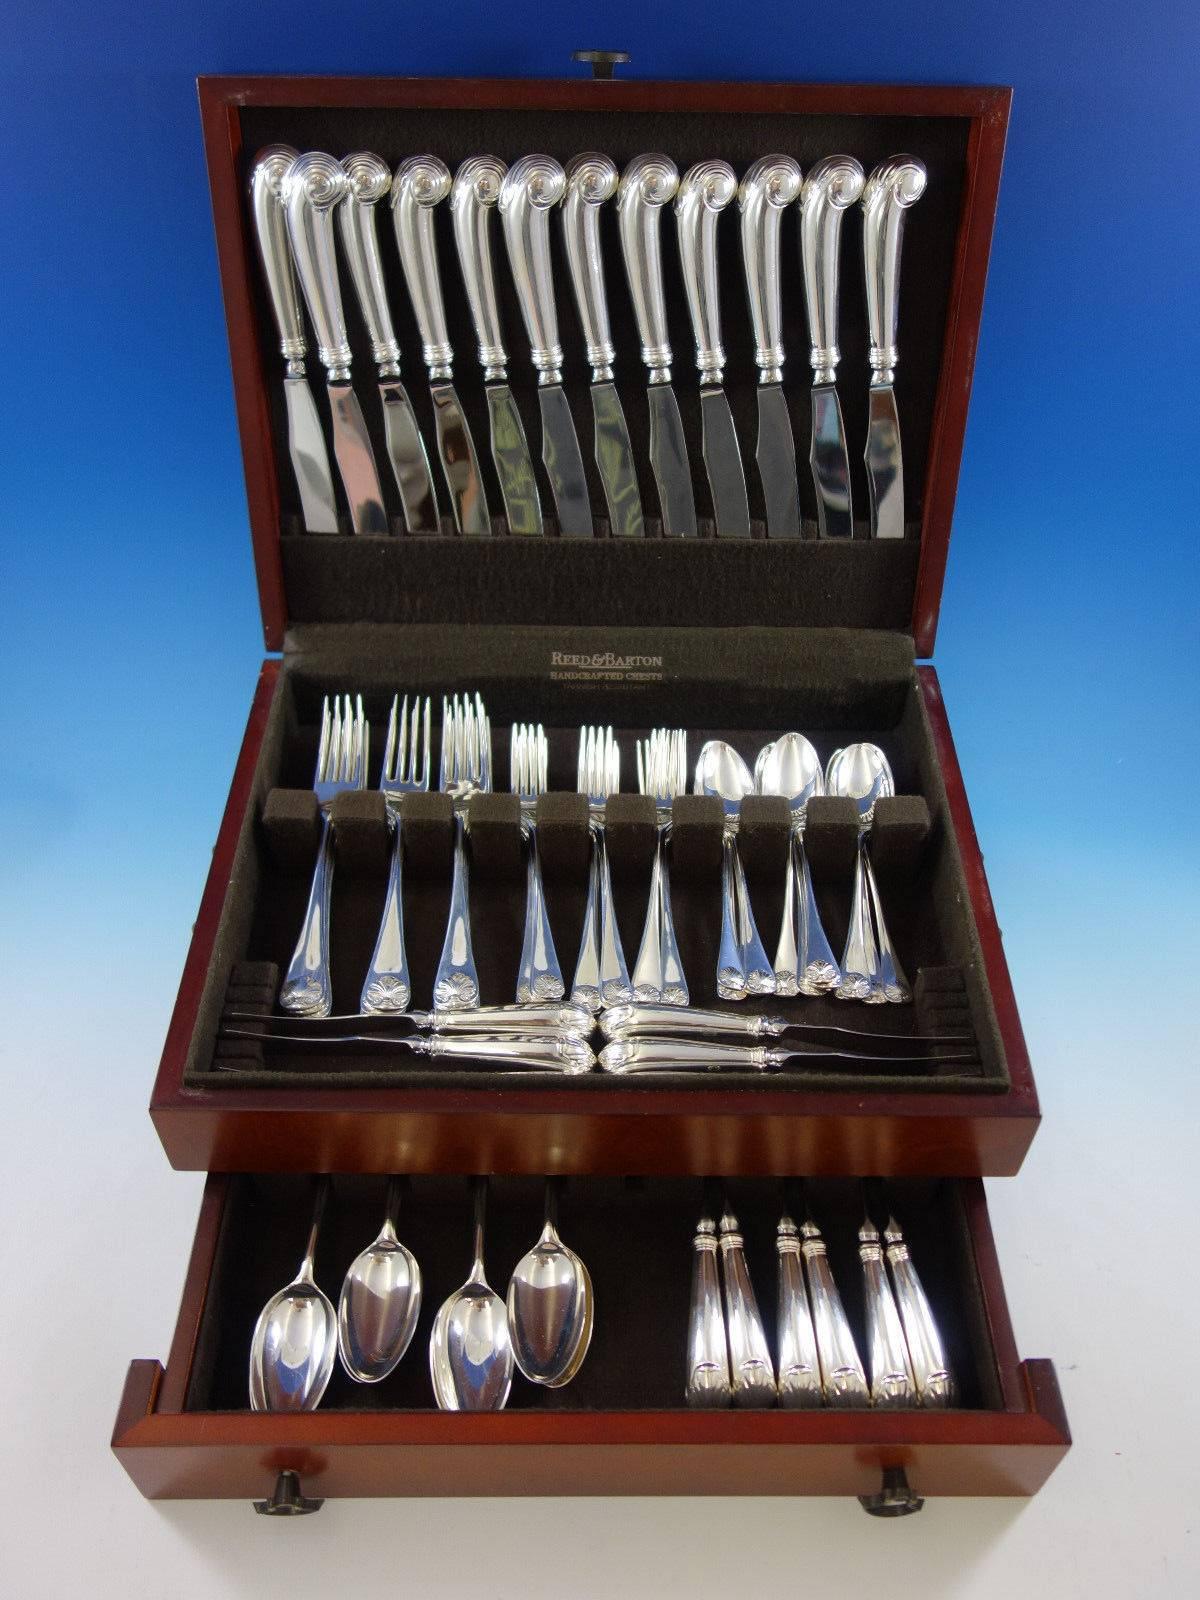 Dinner size Williamsburg Shell by Stieff sterling silver flatware set of 72 pieces. This set includes: 

12 dinner knives with pistol grip handles, 9 3/4